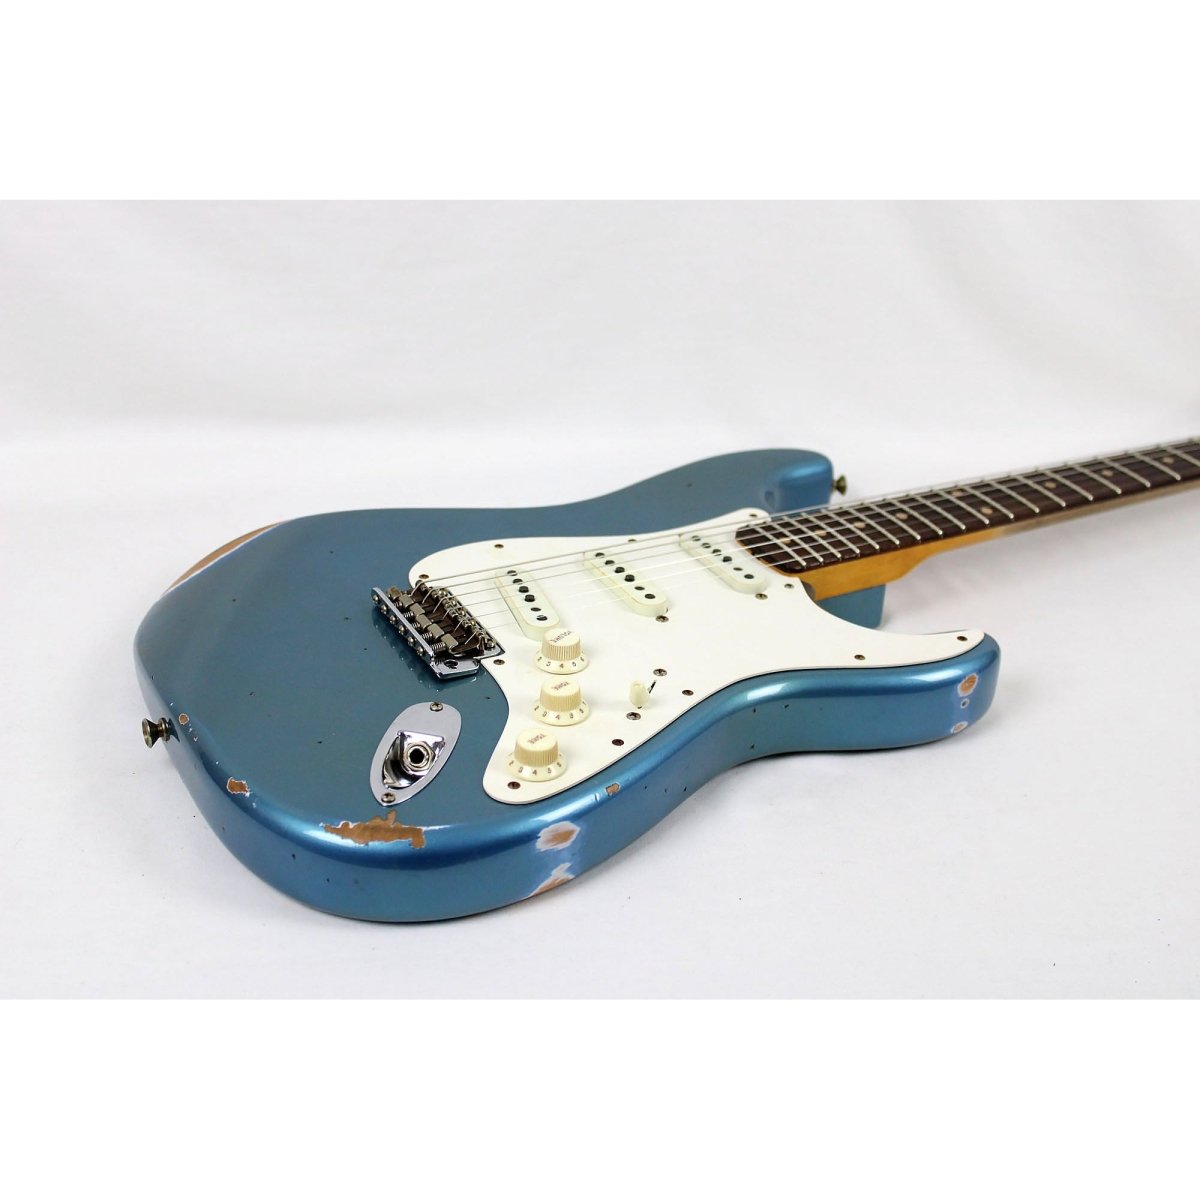 Fender Custom Shop Limited Edition 1959 Stratocaster Relic - Faded Aged Lake Placid Blue - Leitz Music-885978851416-CZ571750